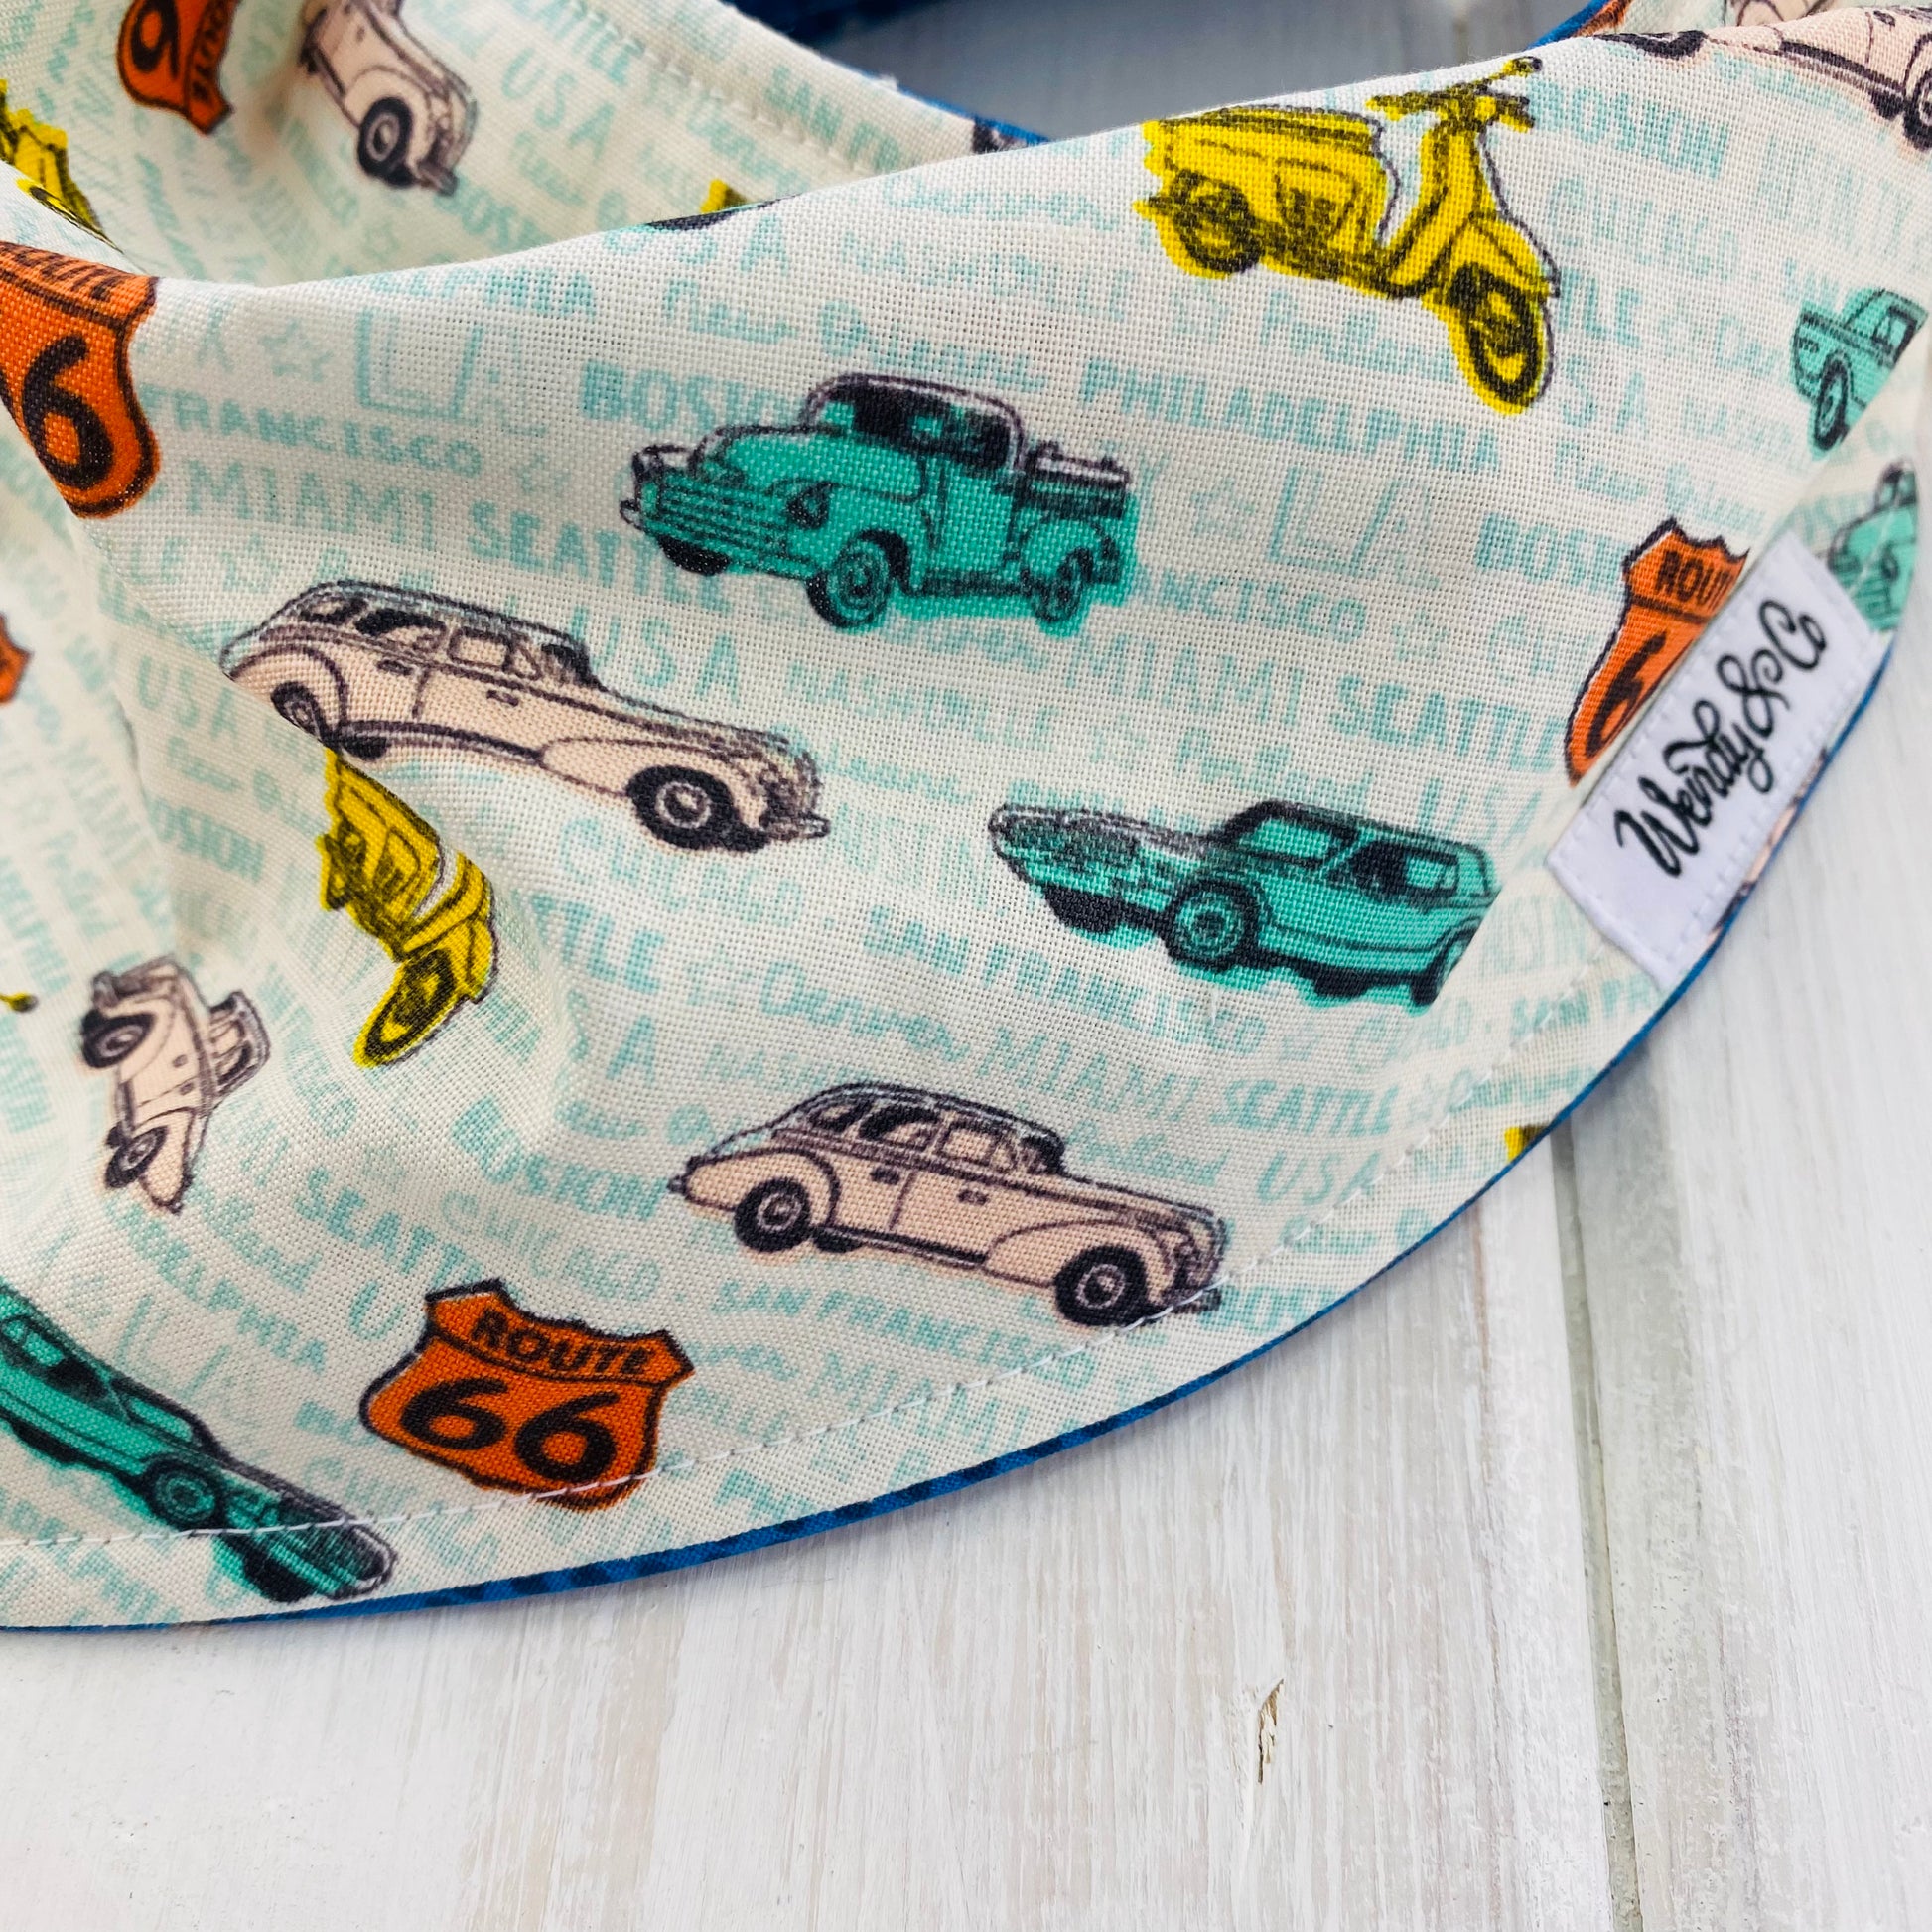 Route 66 fabric with vintage cars in orange, mint and yellow, handmade into a reversible bandana bib.